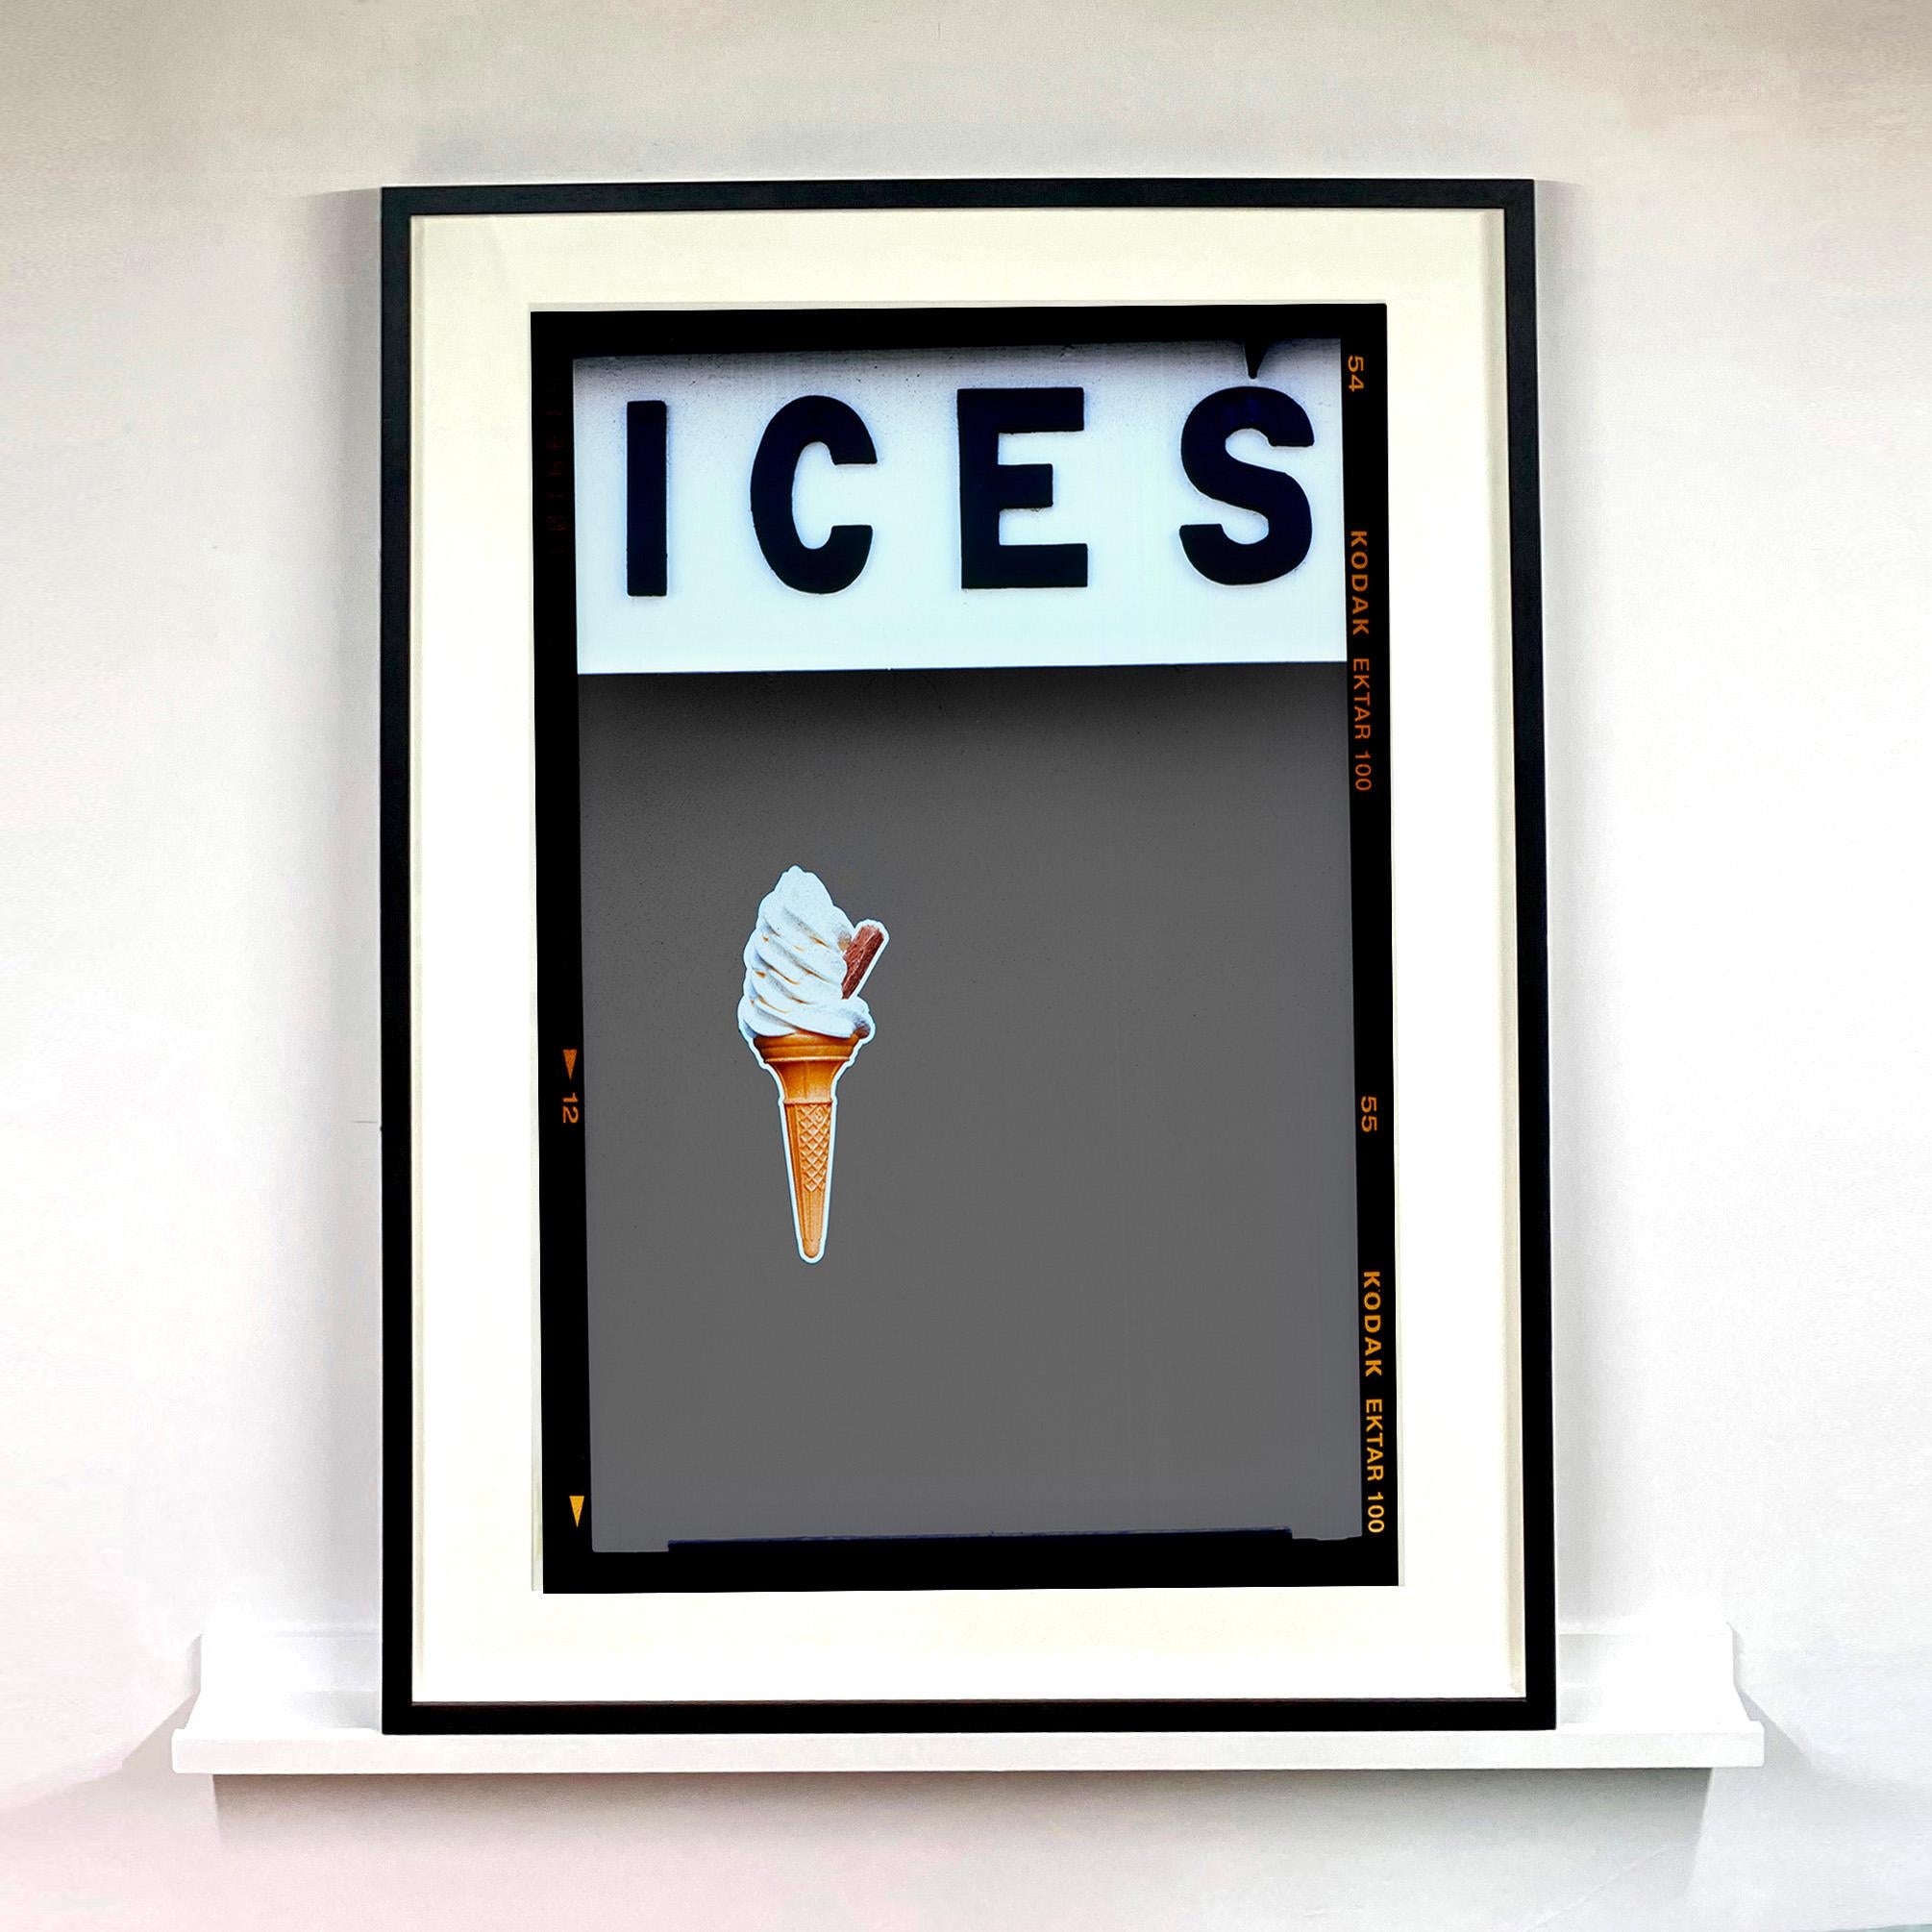 Ices (Grey), Bexhill-on-Sea - British seaside color photography - Pop Art Photograph by Richard Heeps